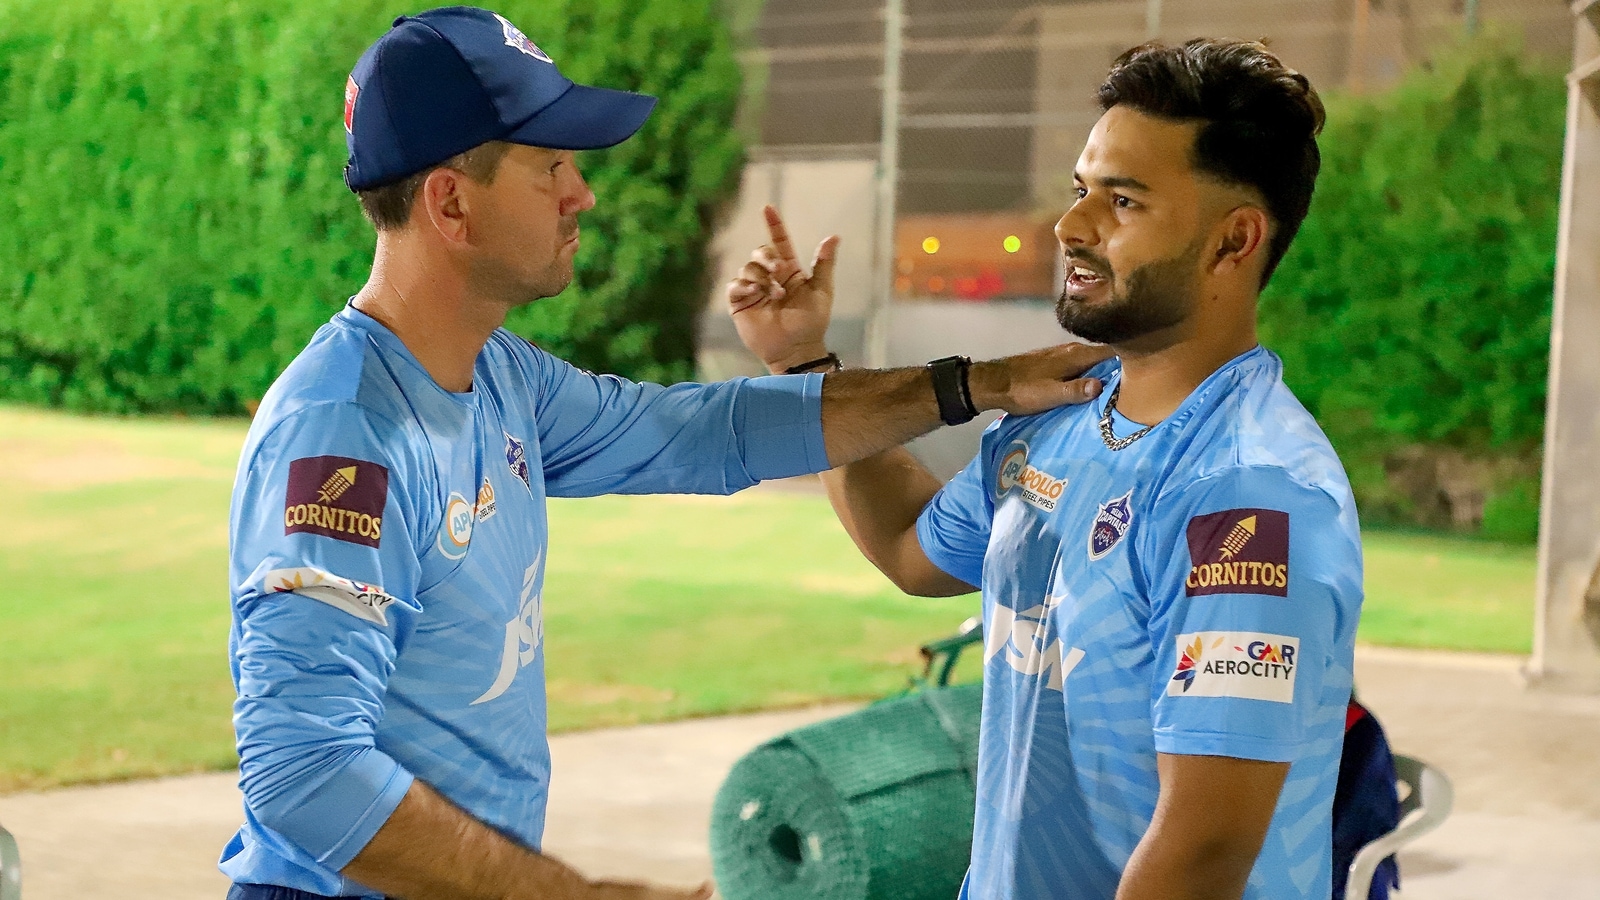 Rishabh Pant reserves special praise for Ponting, calls him 'family member'  | Cricket - Hindustan Times